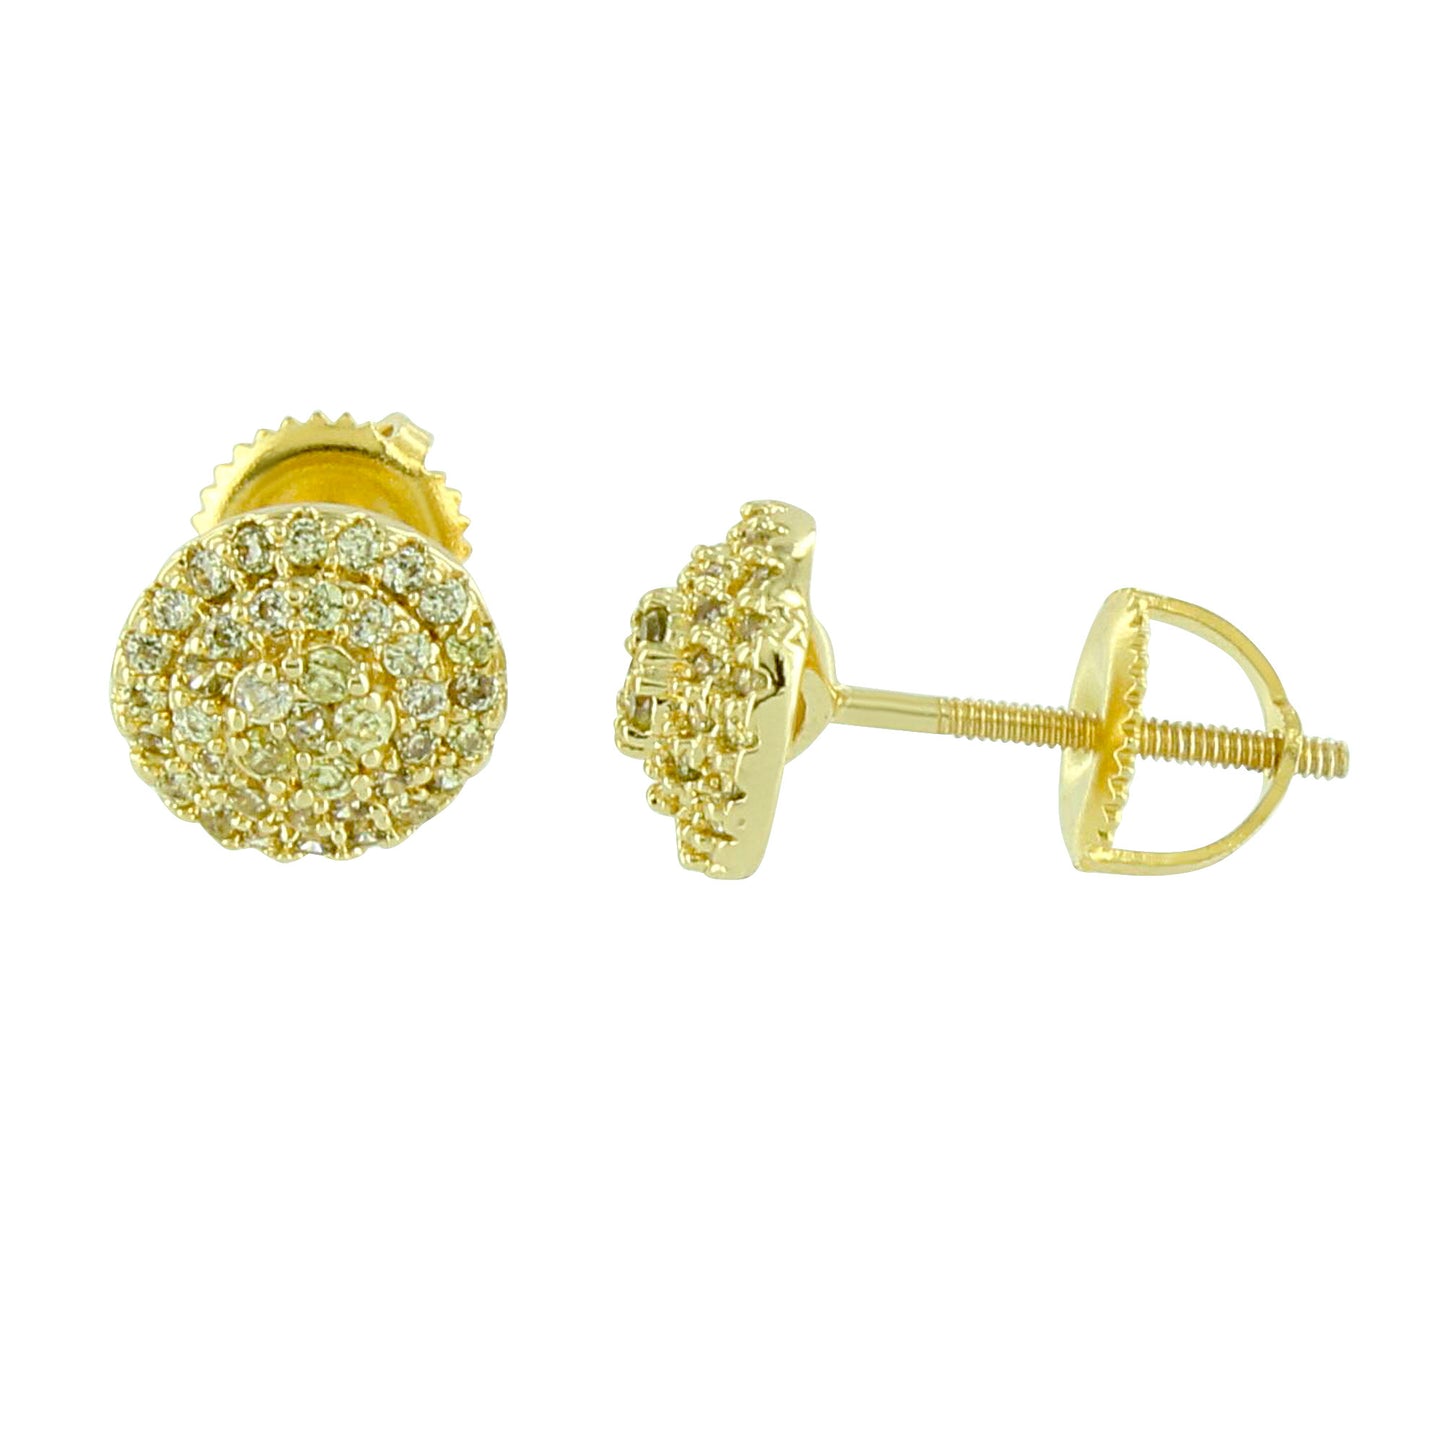 14K Yellow Gold Finish Earrings Simulated Diamonds Canary Screw Back 8 MM